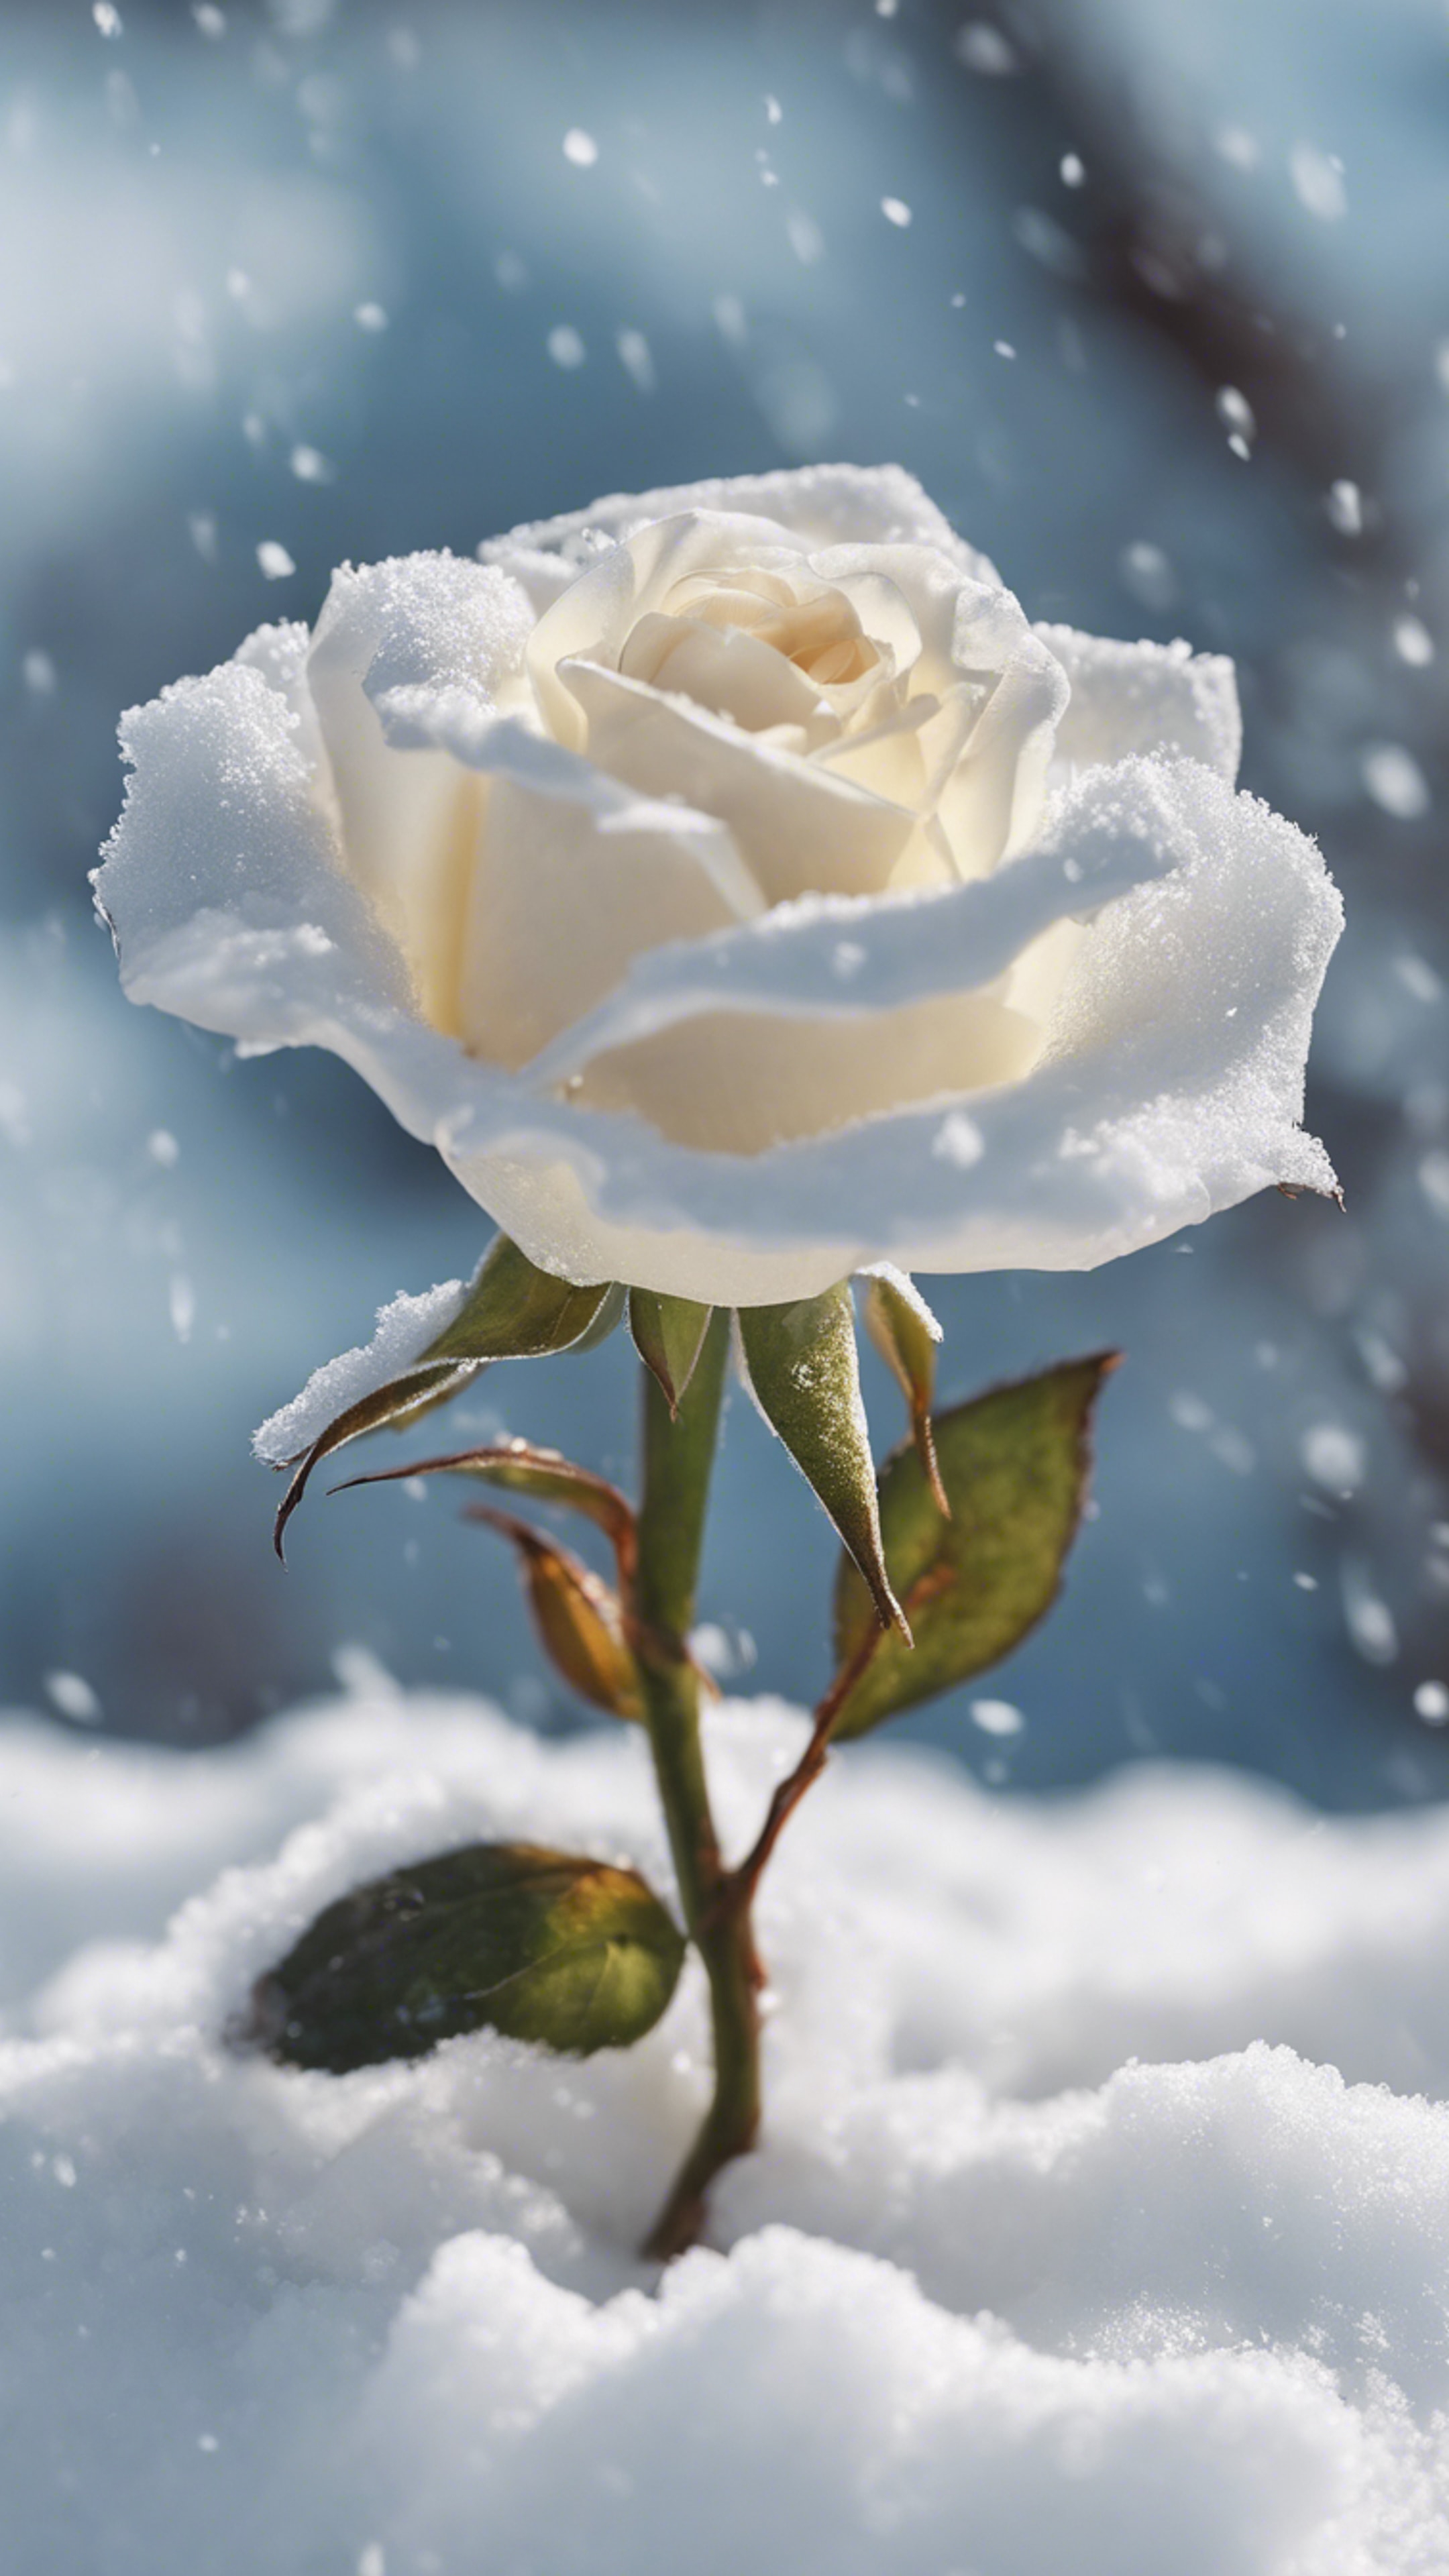 A newly opened white rose sticking out of a snowdrift in early spring. Валлпапер[6918b7c4f5774047824c]